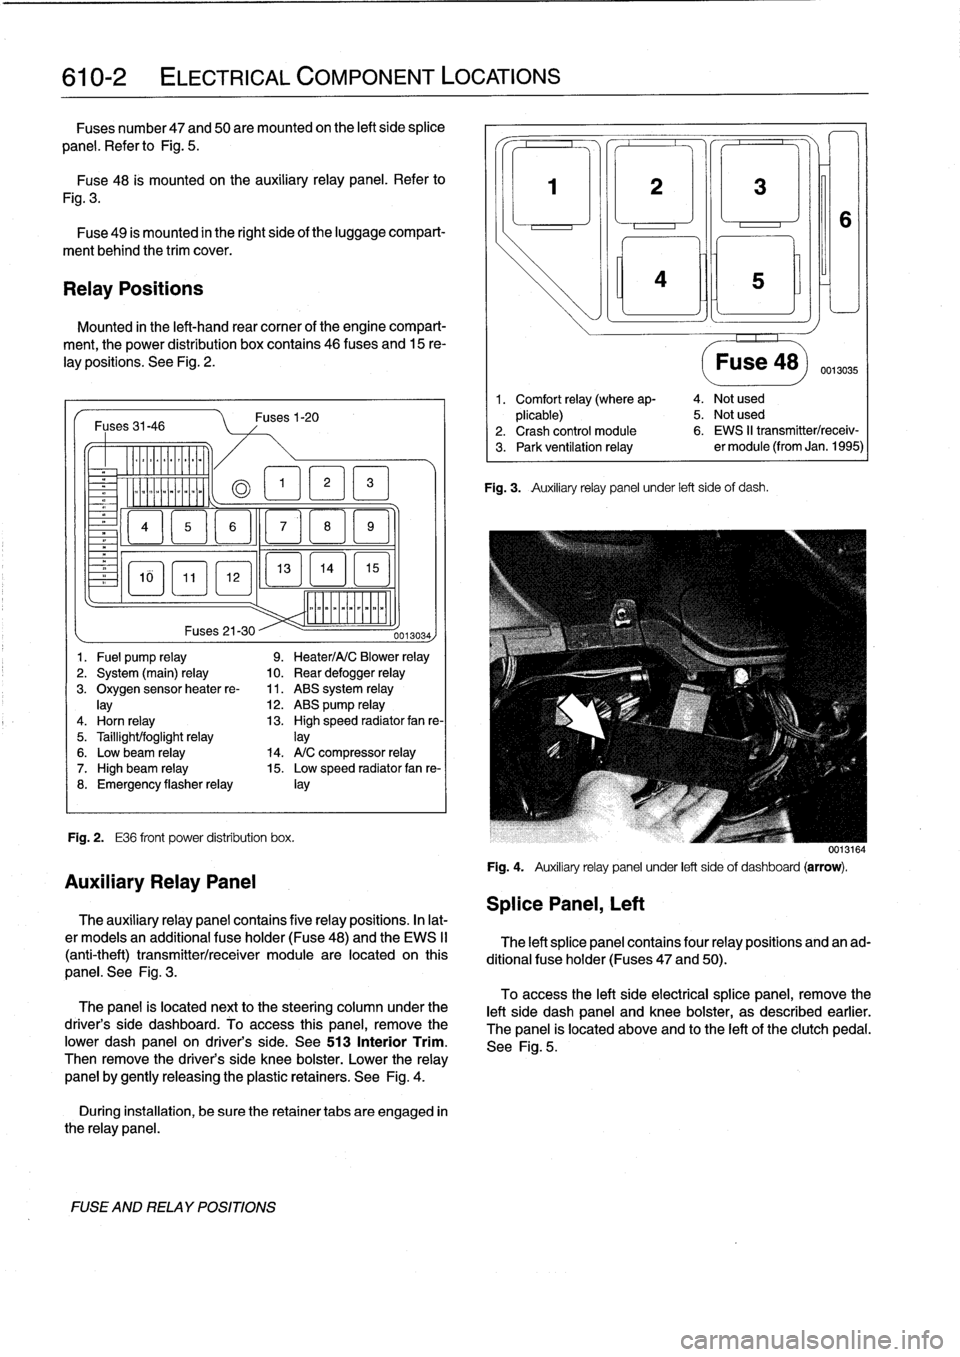 BMW 323i 1998 E36 Workshop Manual 
610-2

	

ELECTRICAL
COMPONENT
LOCATIONS

Fuses
number47
and
50are
mounted
on
the
left
side
splice

panel
.
Refer
lo
Fig
.
5
.

Fuse48
is
mounted
on
the
auxiliary
relay
panel
.
Refer
to

Fig
.
3
.

F